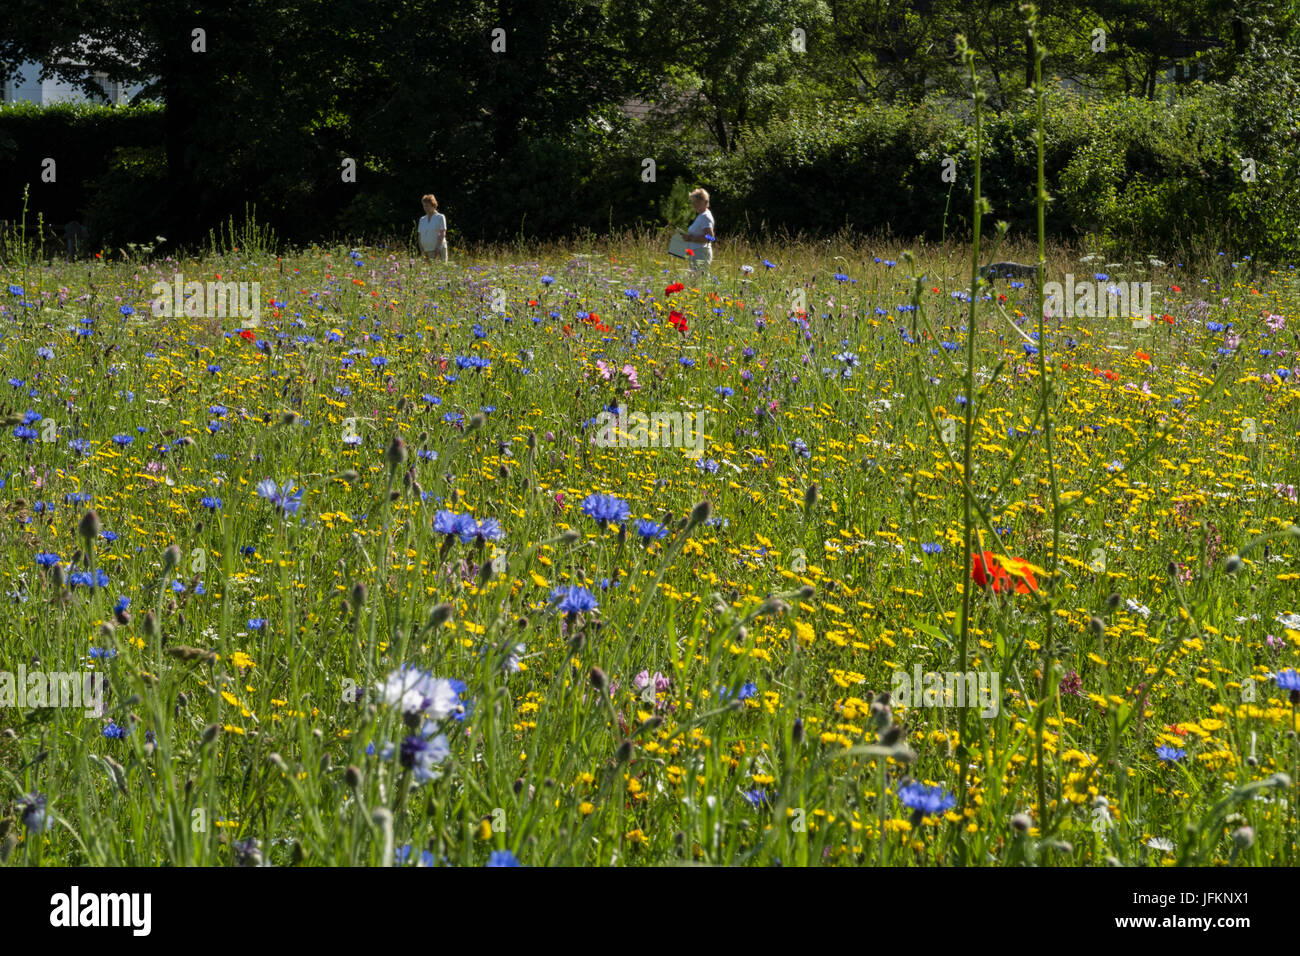 Sidmouth, Devon, 2nd July 17. UK Weather: A glorious morning in Sid Meadow, which is sown with wild flowers each year, and attracts hundreds of visitors. Credit: South West Photos/Alamy Live News Stock Photo